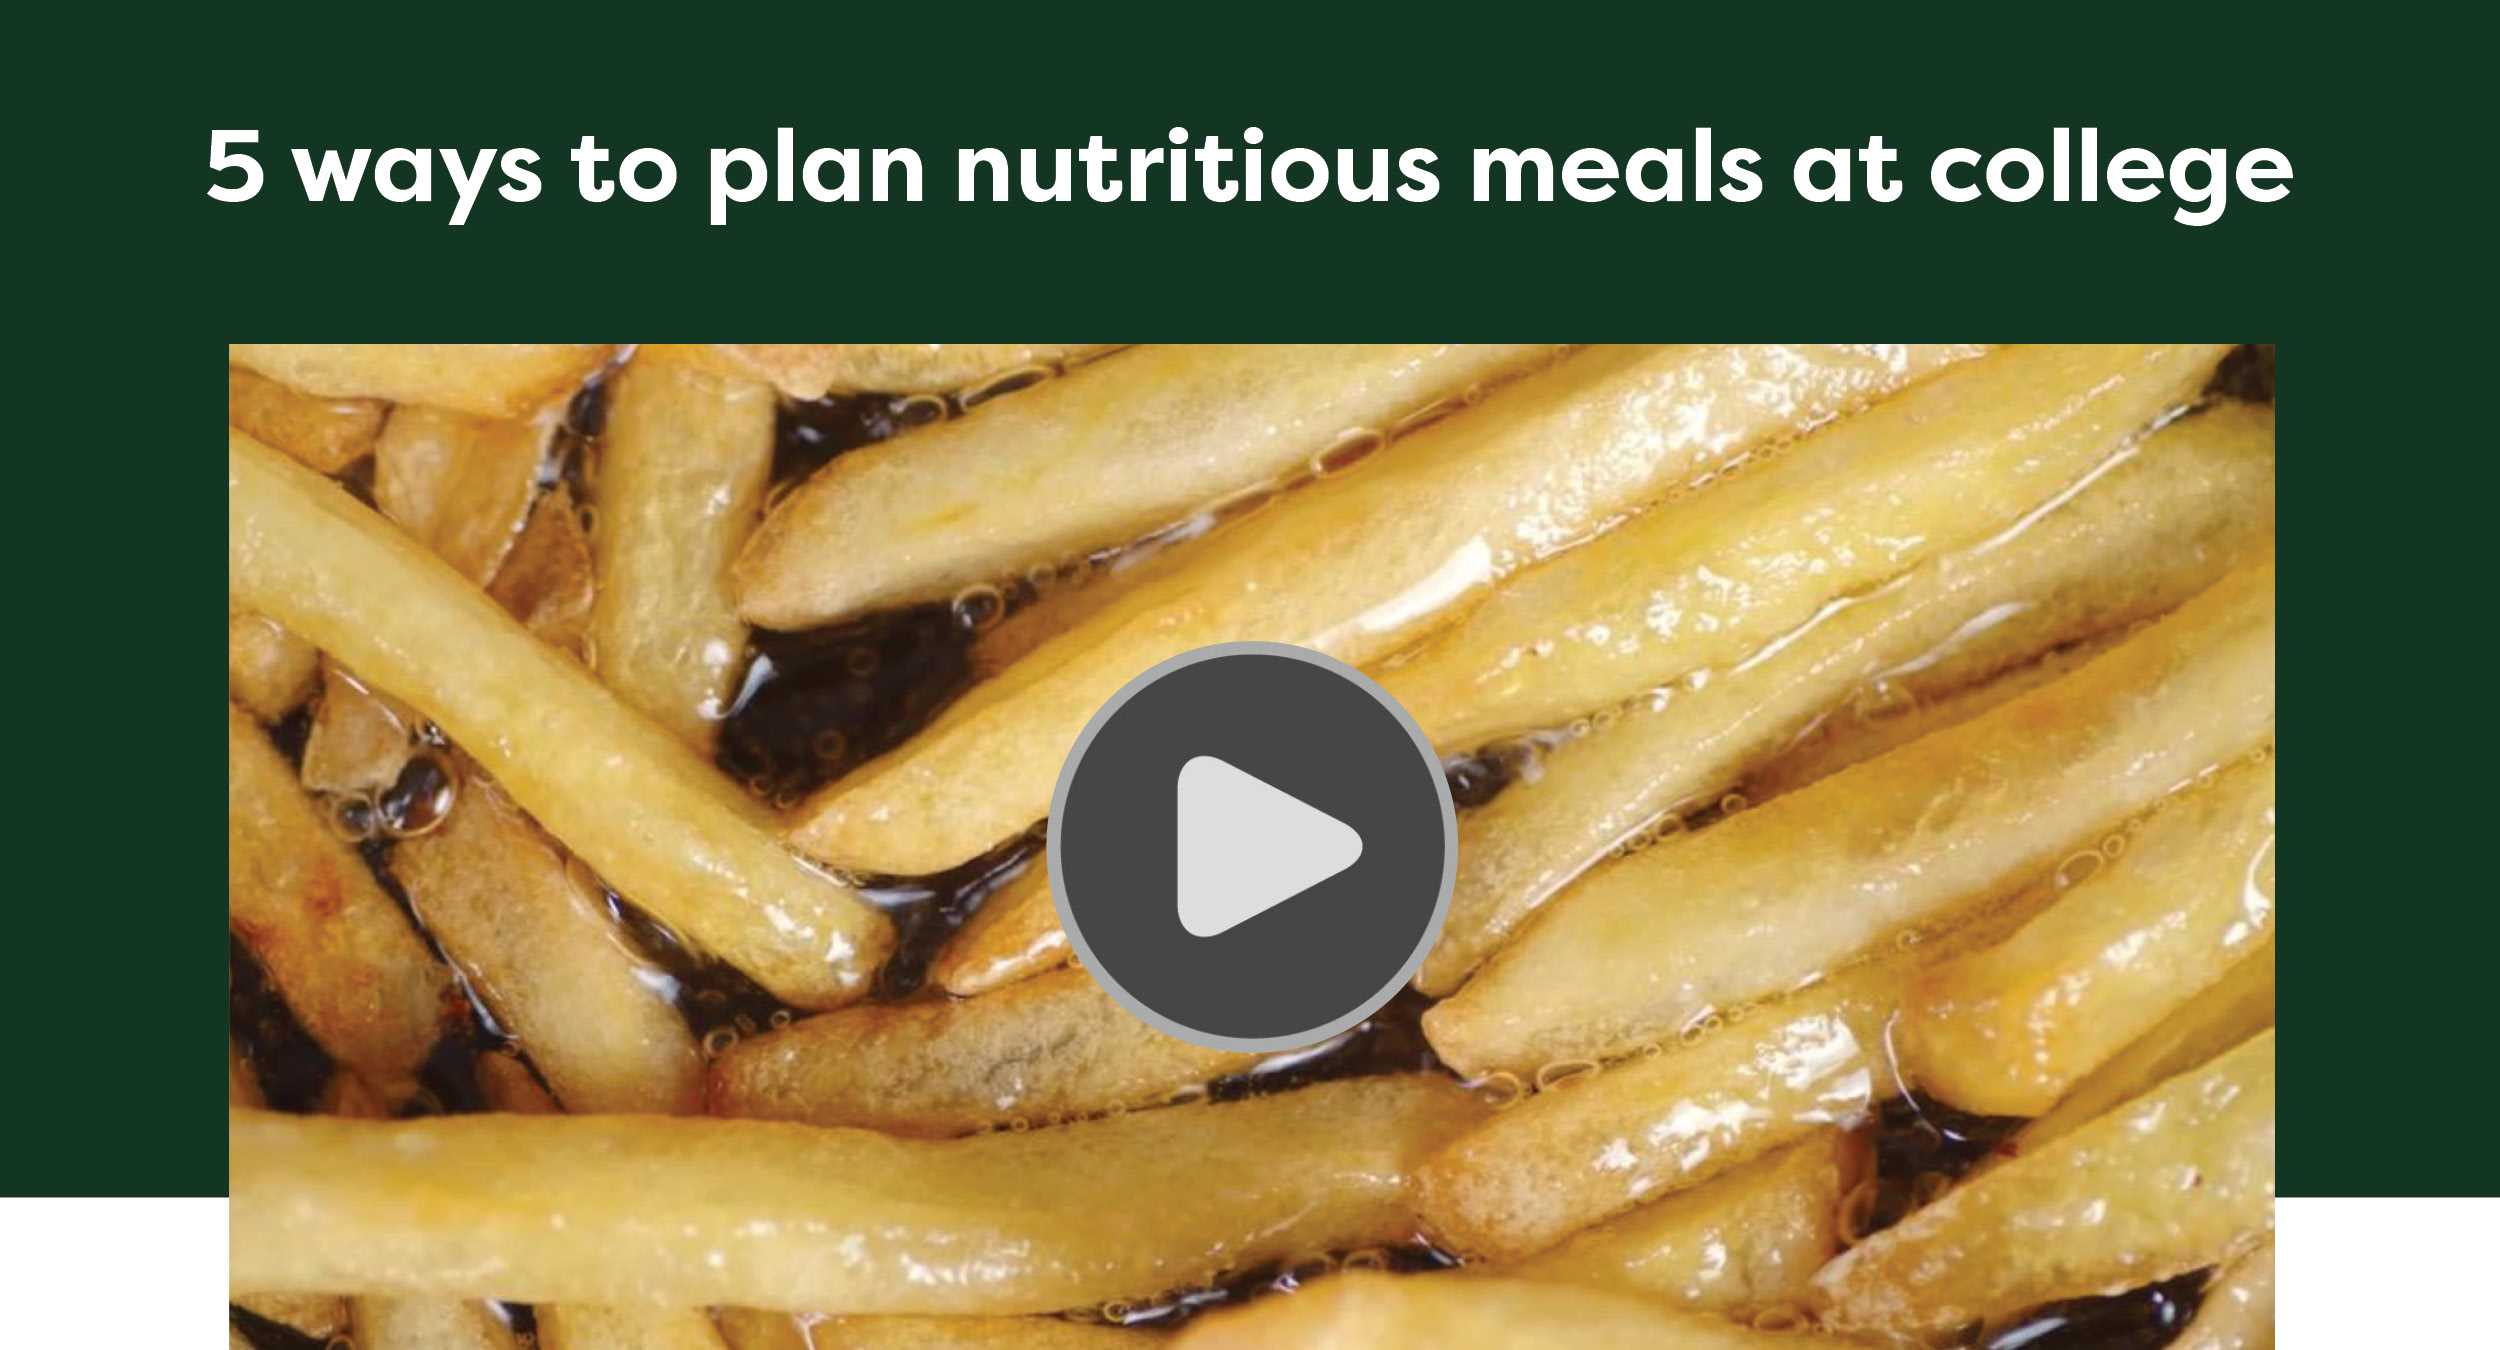 5 ways to plan nutritious meals at college